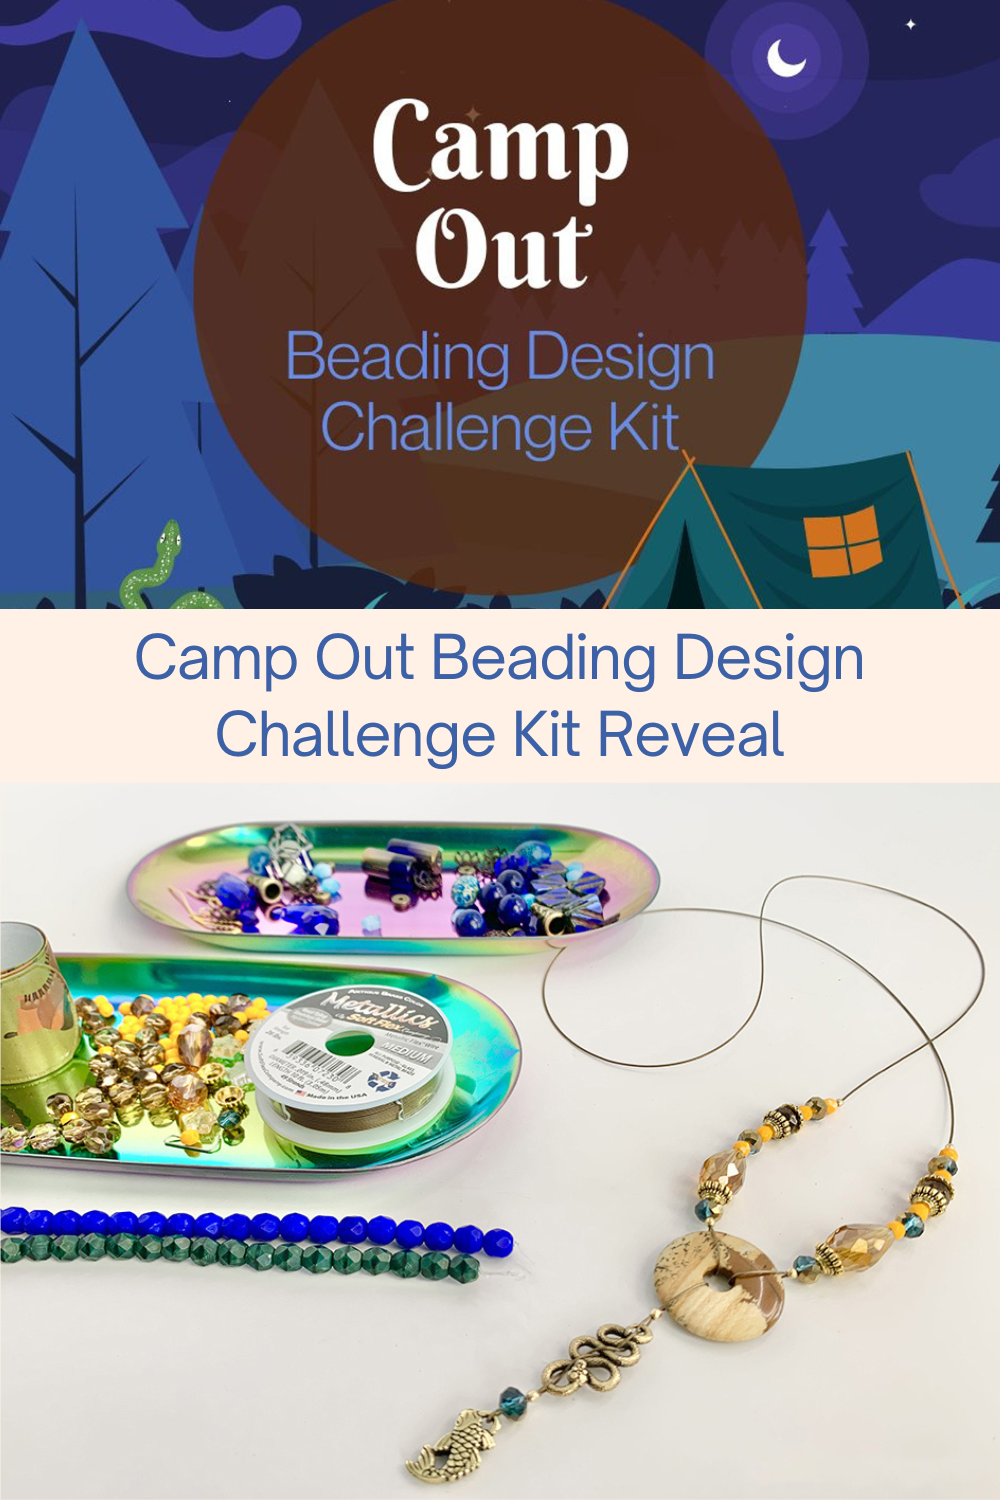 Camp Out Beading Design Challenge Kit Reveal Collage